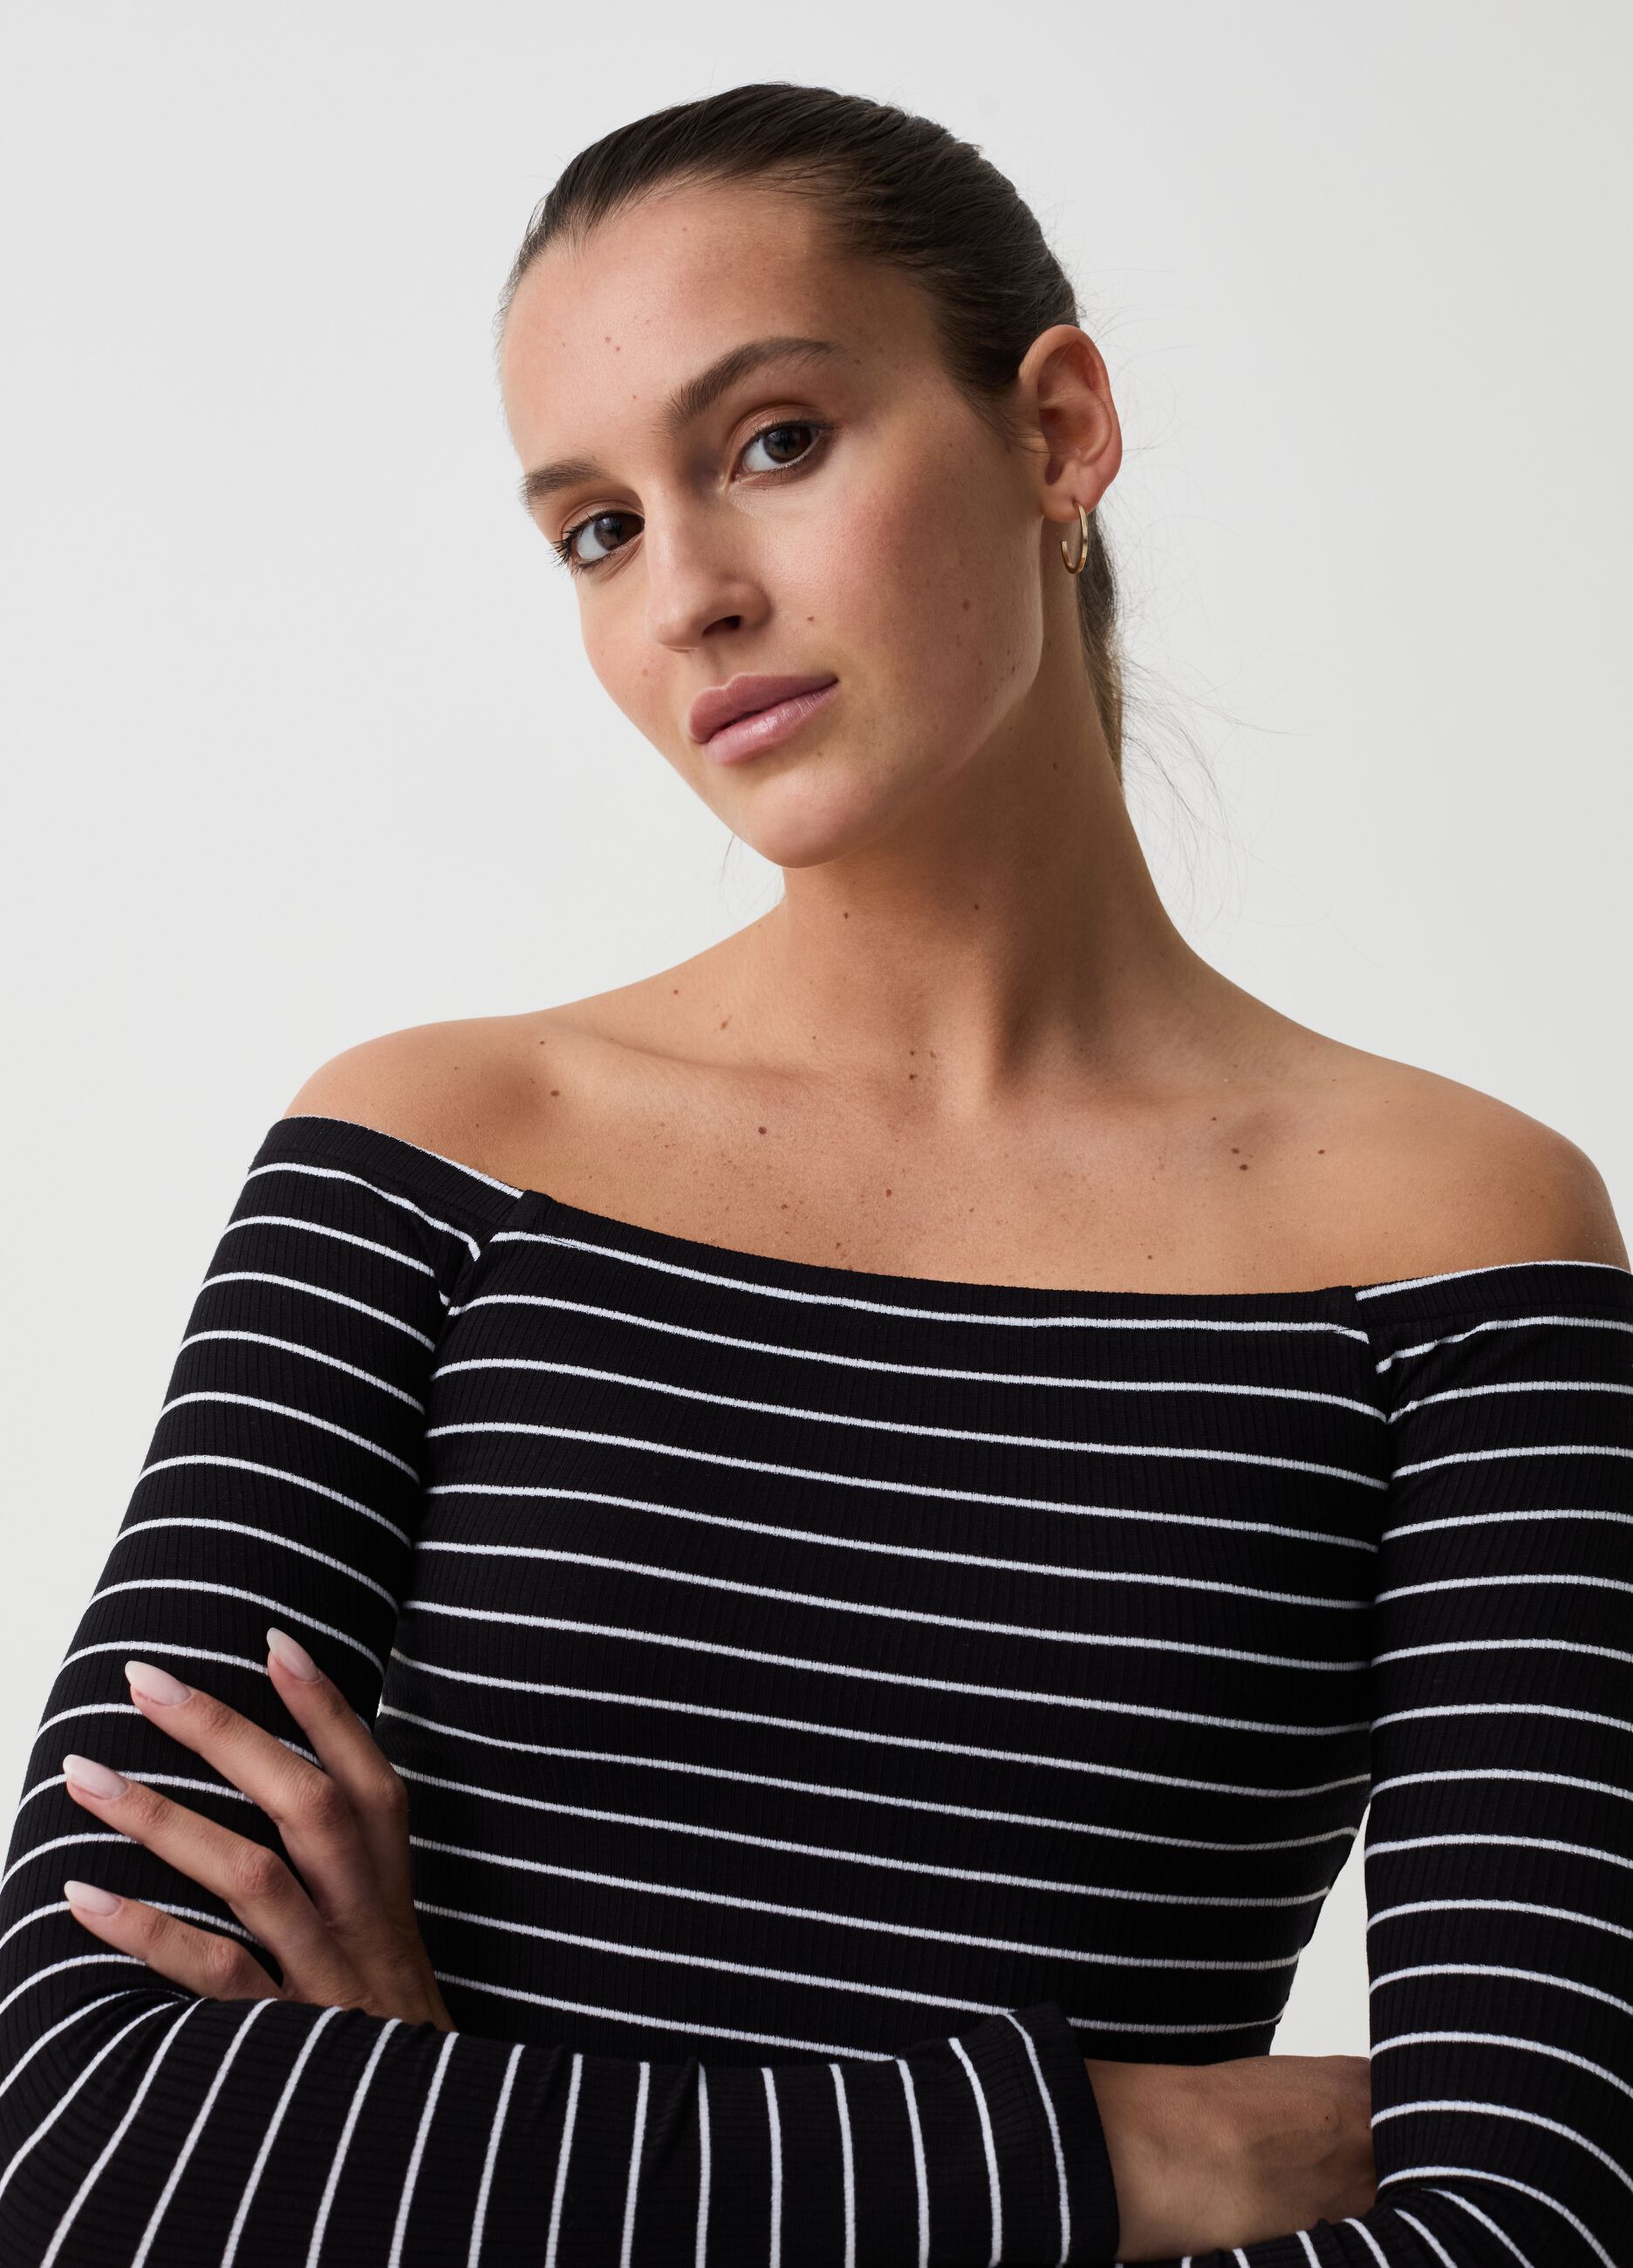 Striped T-shirt with drop shoulders